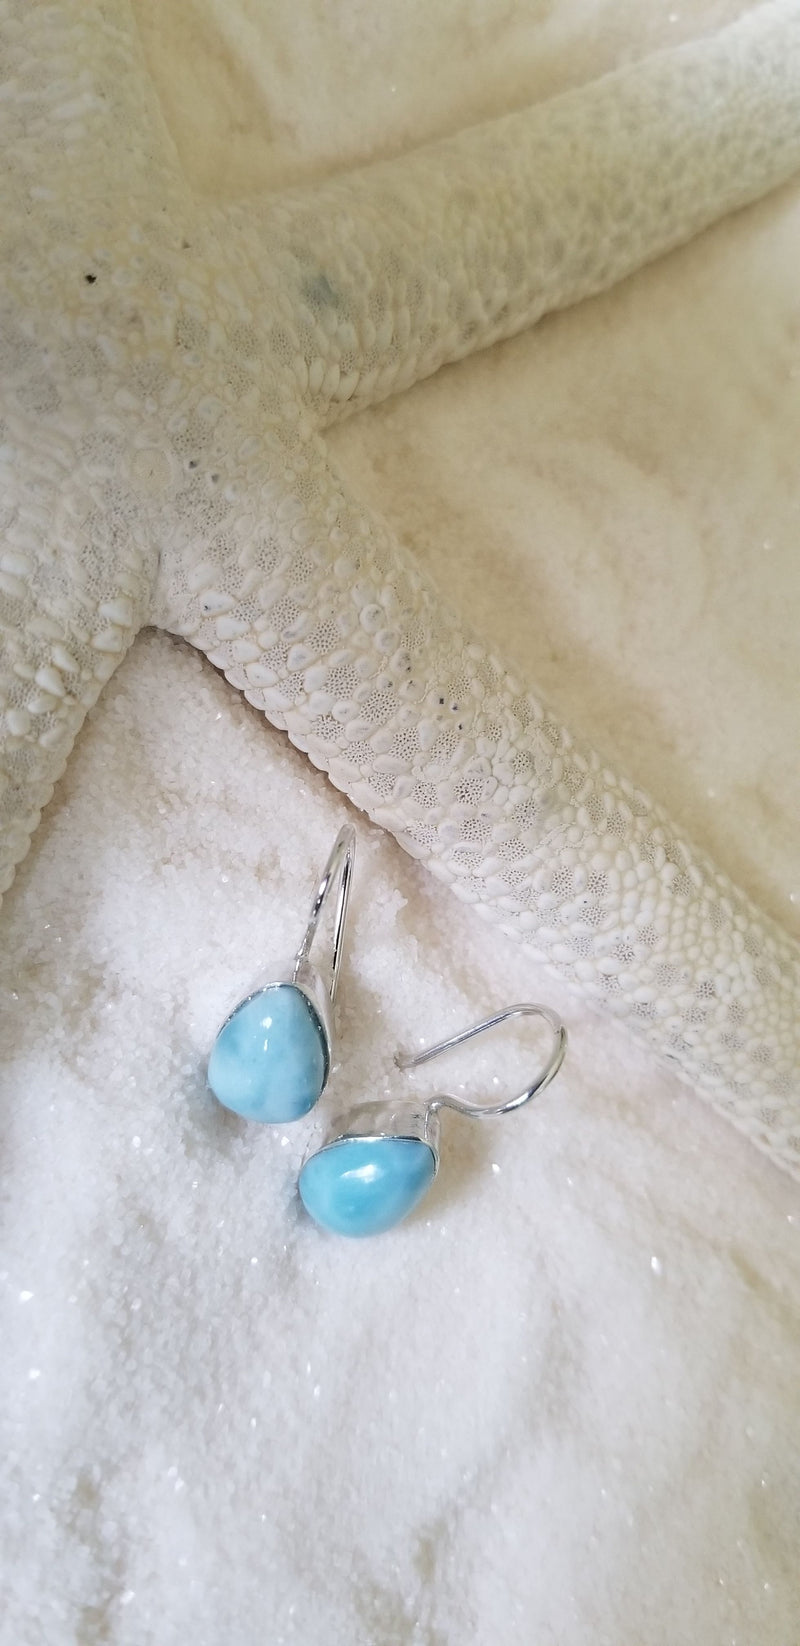 LARIMAR and Sterling Silver small teardrop Earrings with fixed french wires - LarimarOcean  